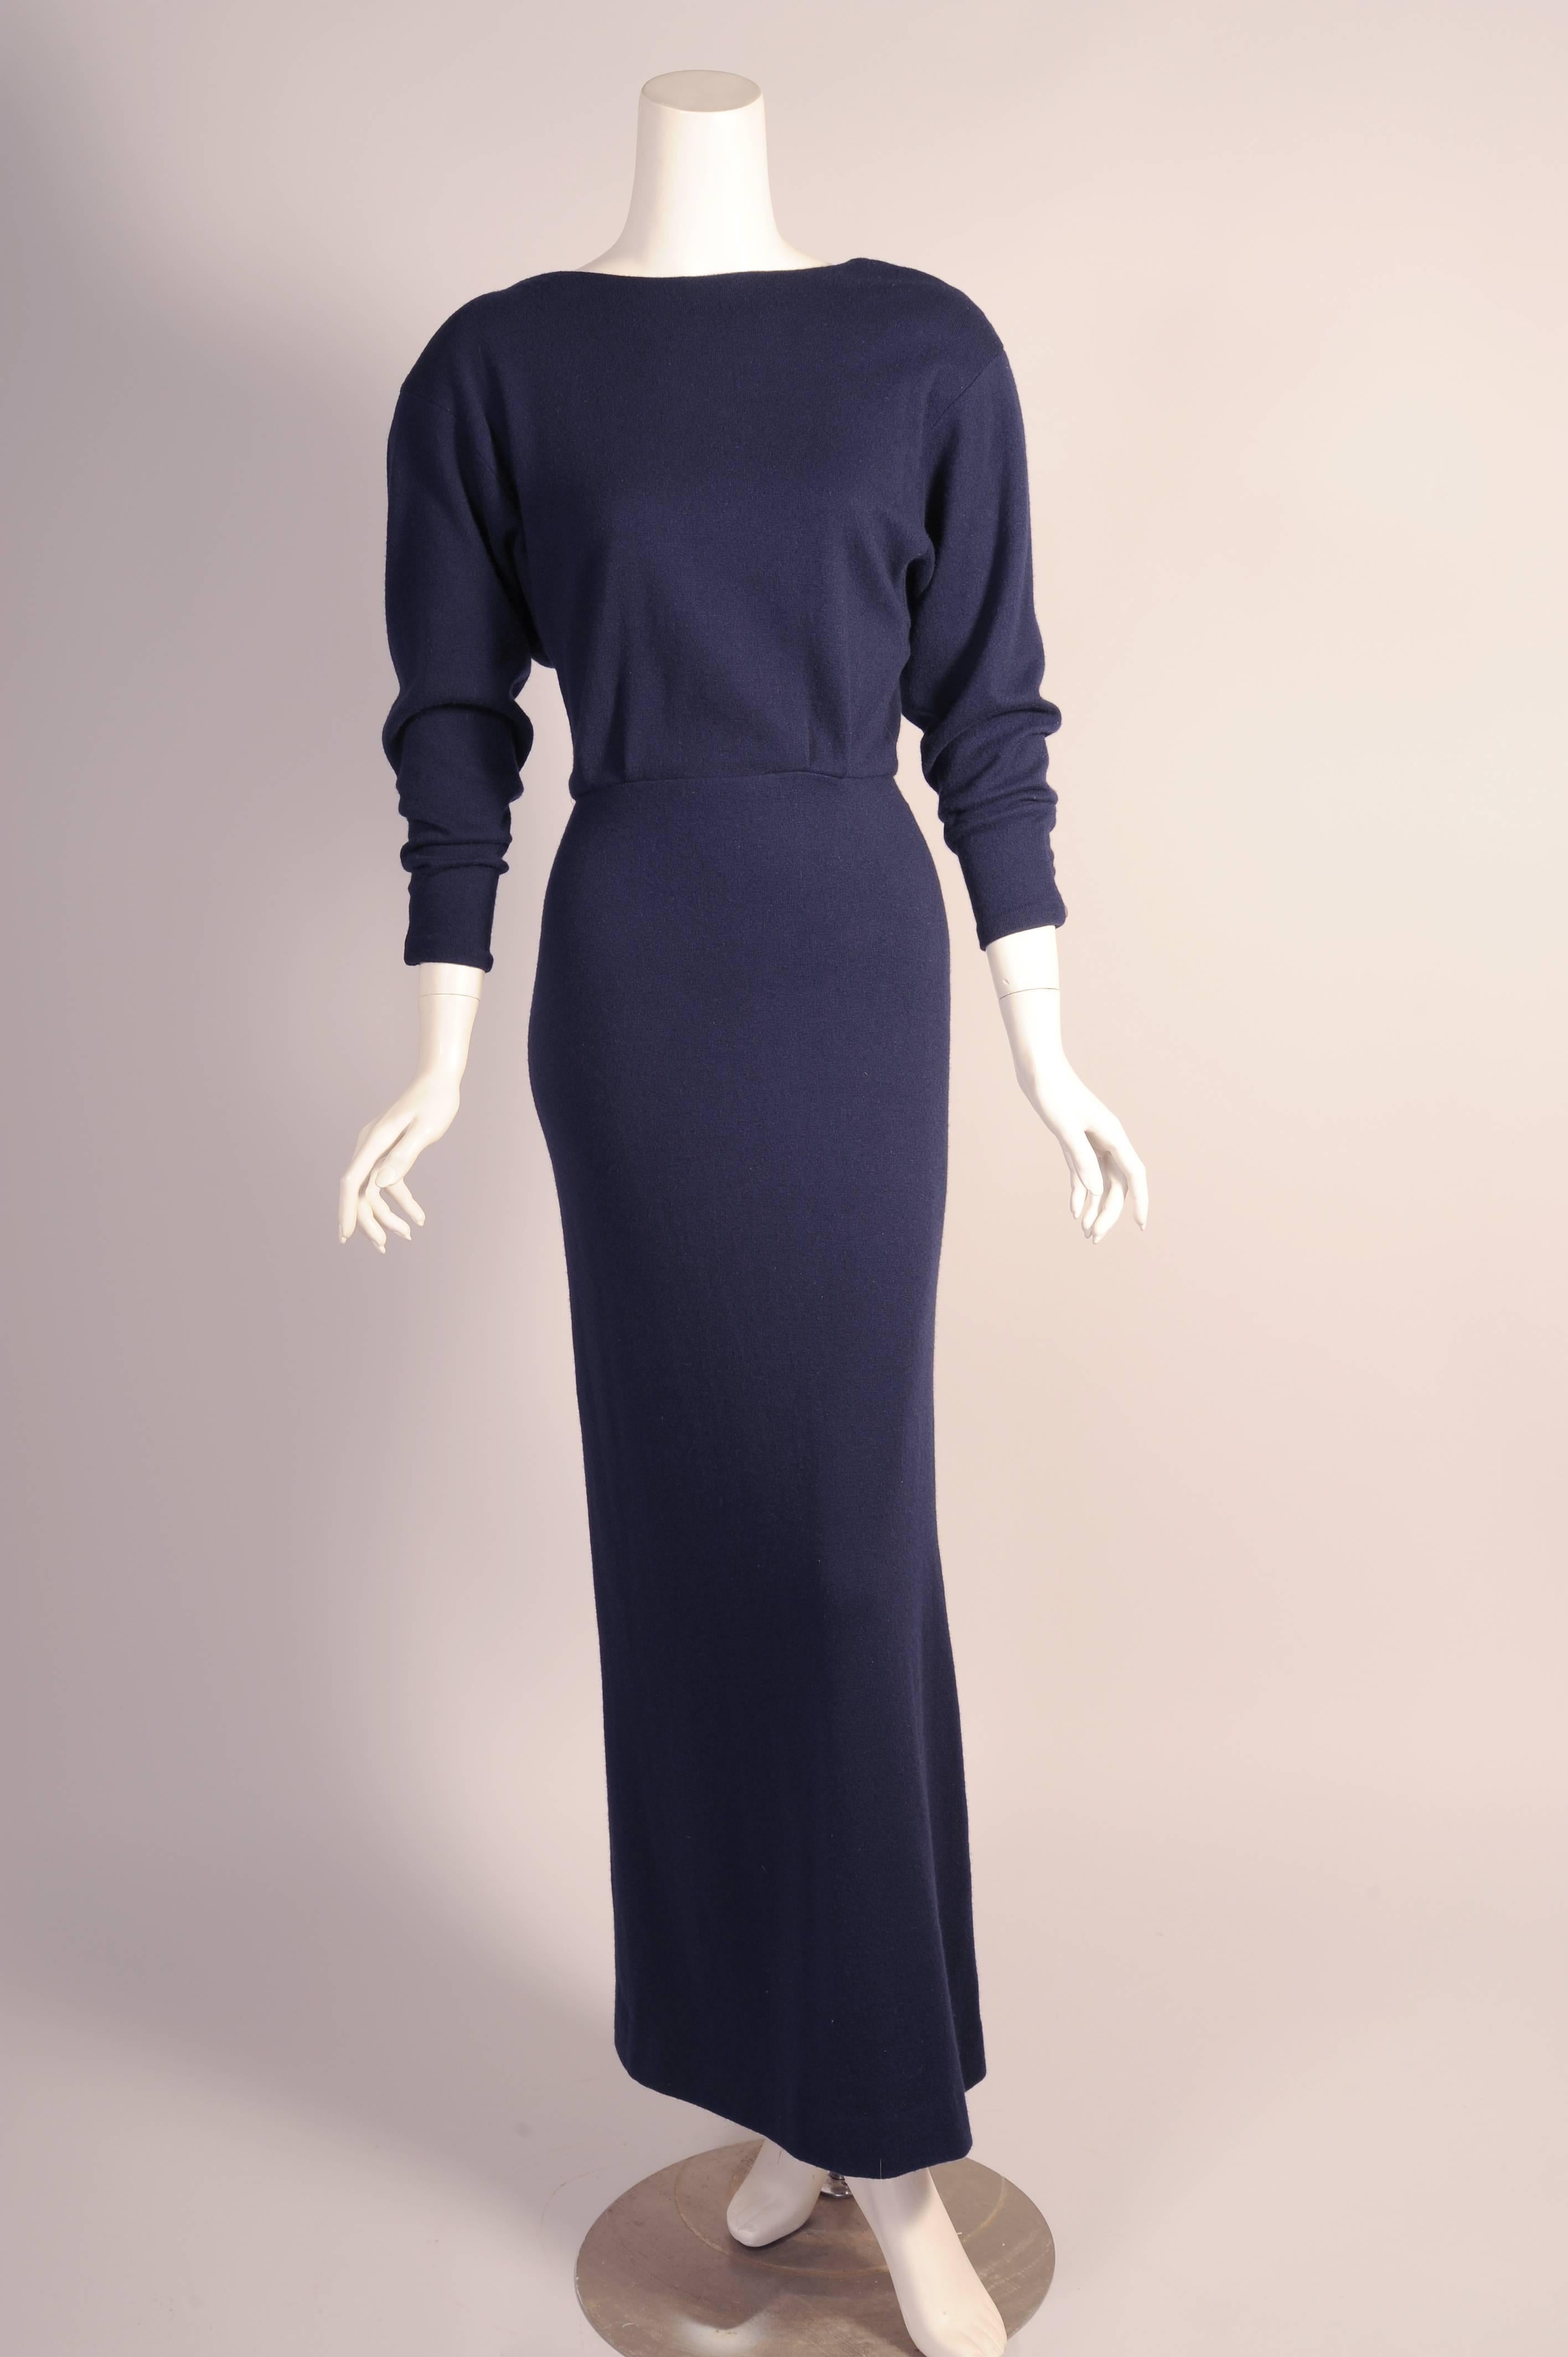 Black 1970's Navy Blue Cashmere Bare Back Evening Dress attributed to Halston